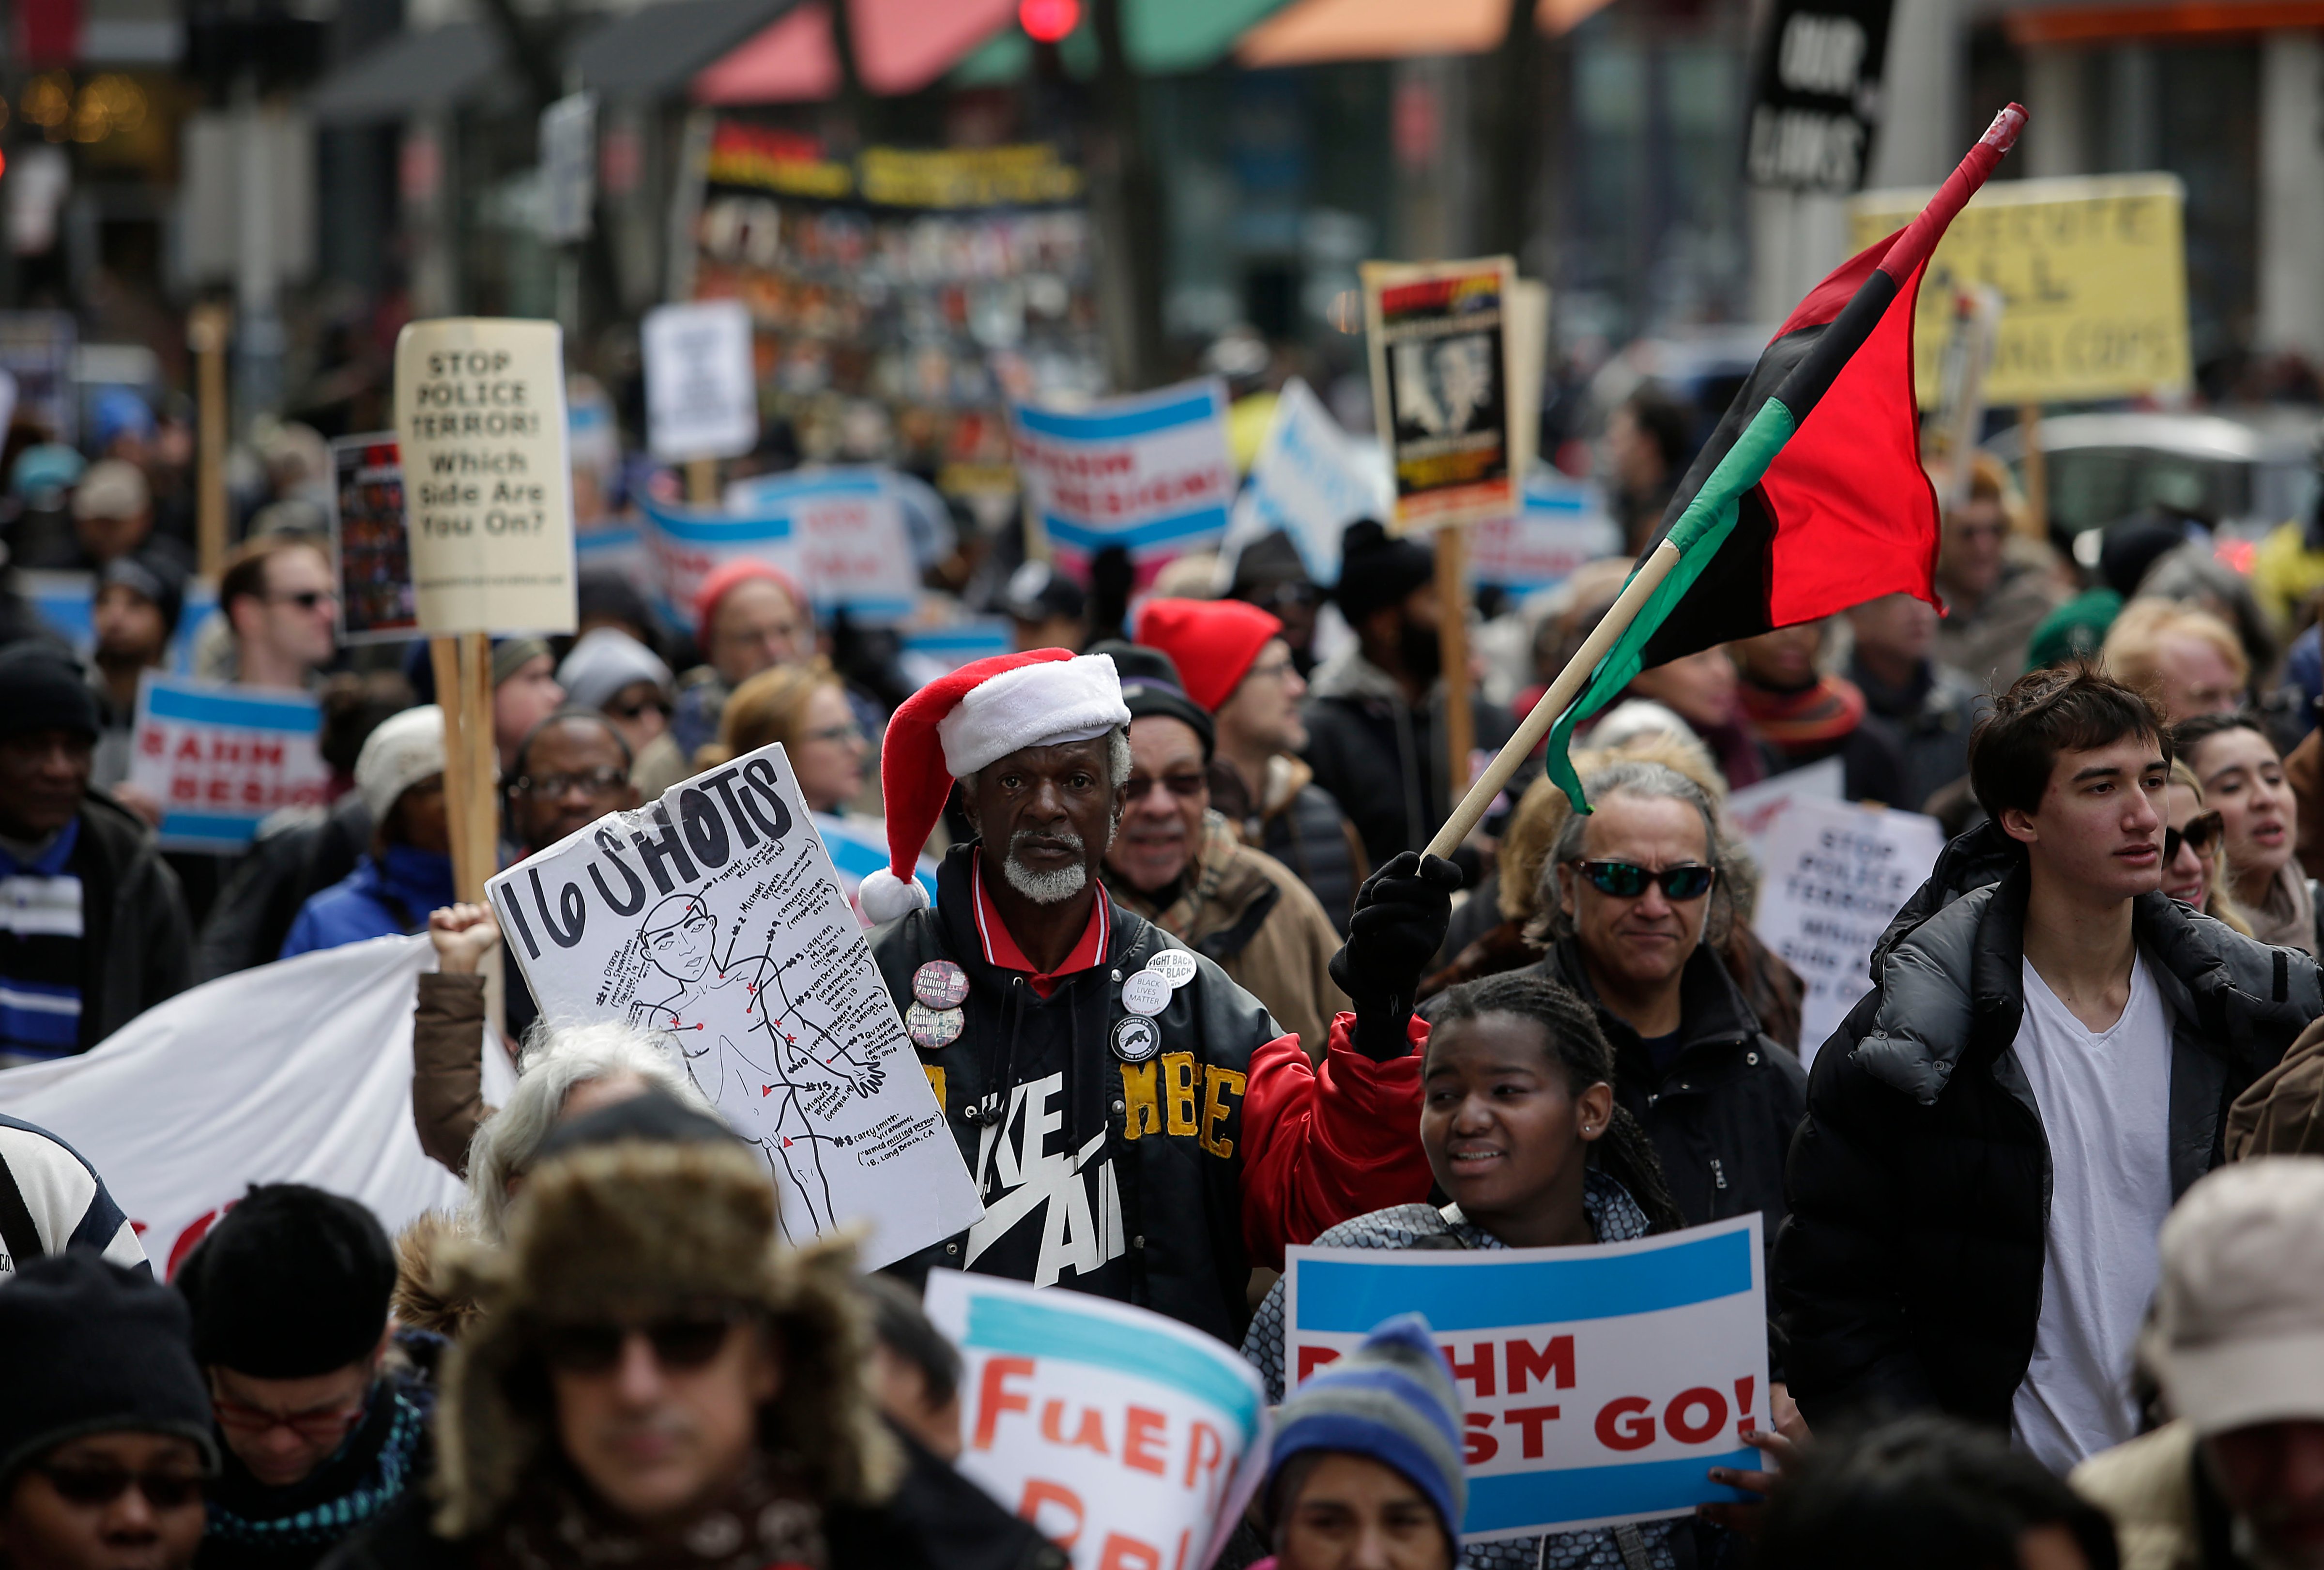 Demonstrators protest the shooting of Laquan McDonald in Chicago, on Dec. 24, 2015. (Joshua Lott—Getty Images)